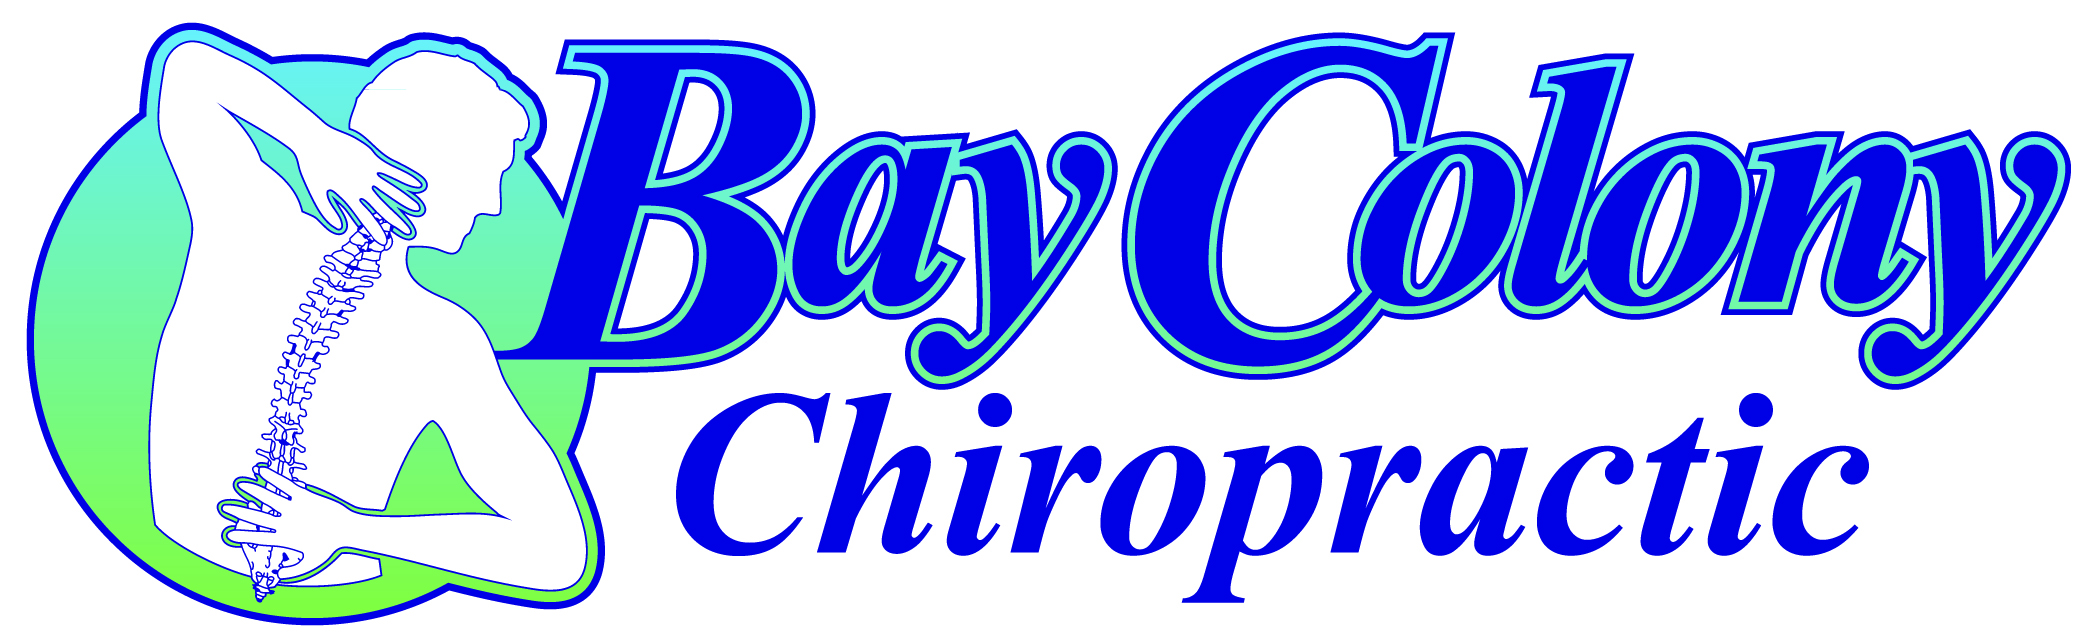 bay colony chiropractic